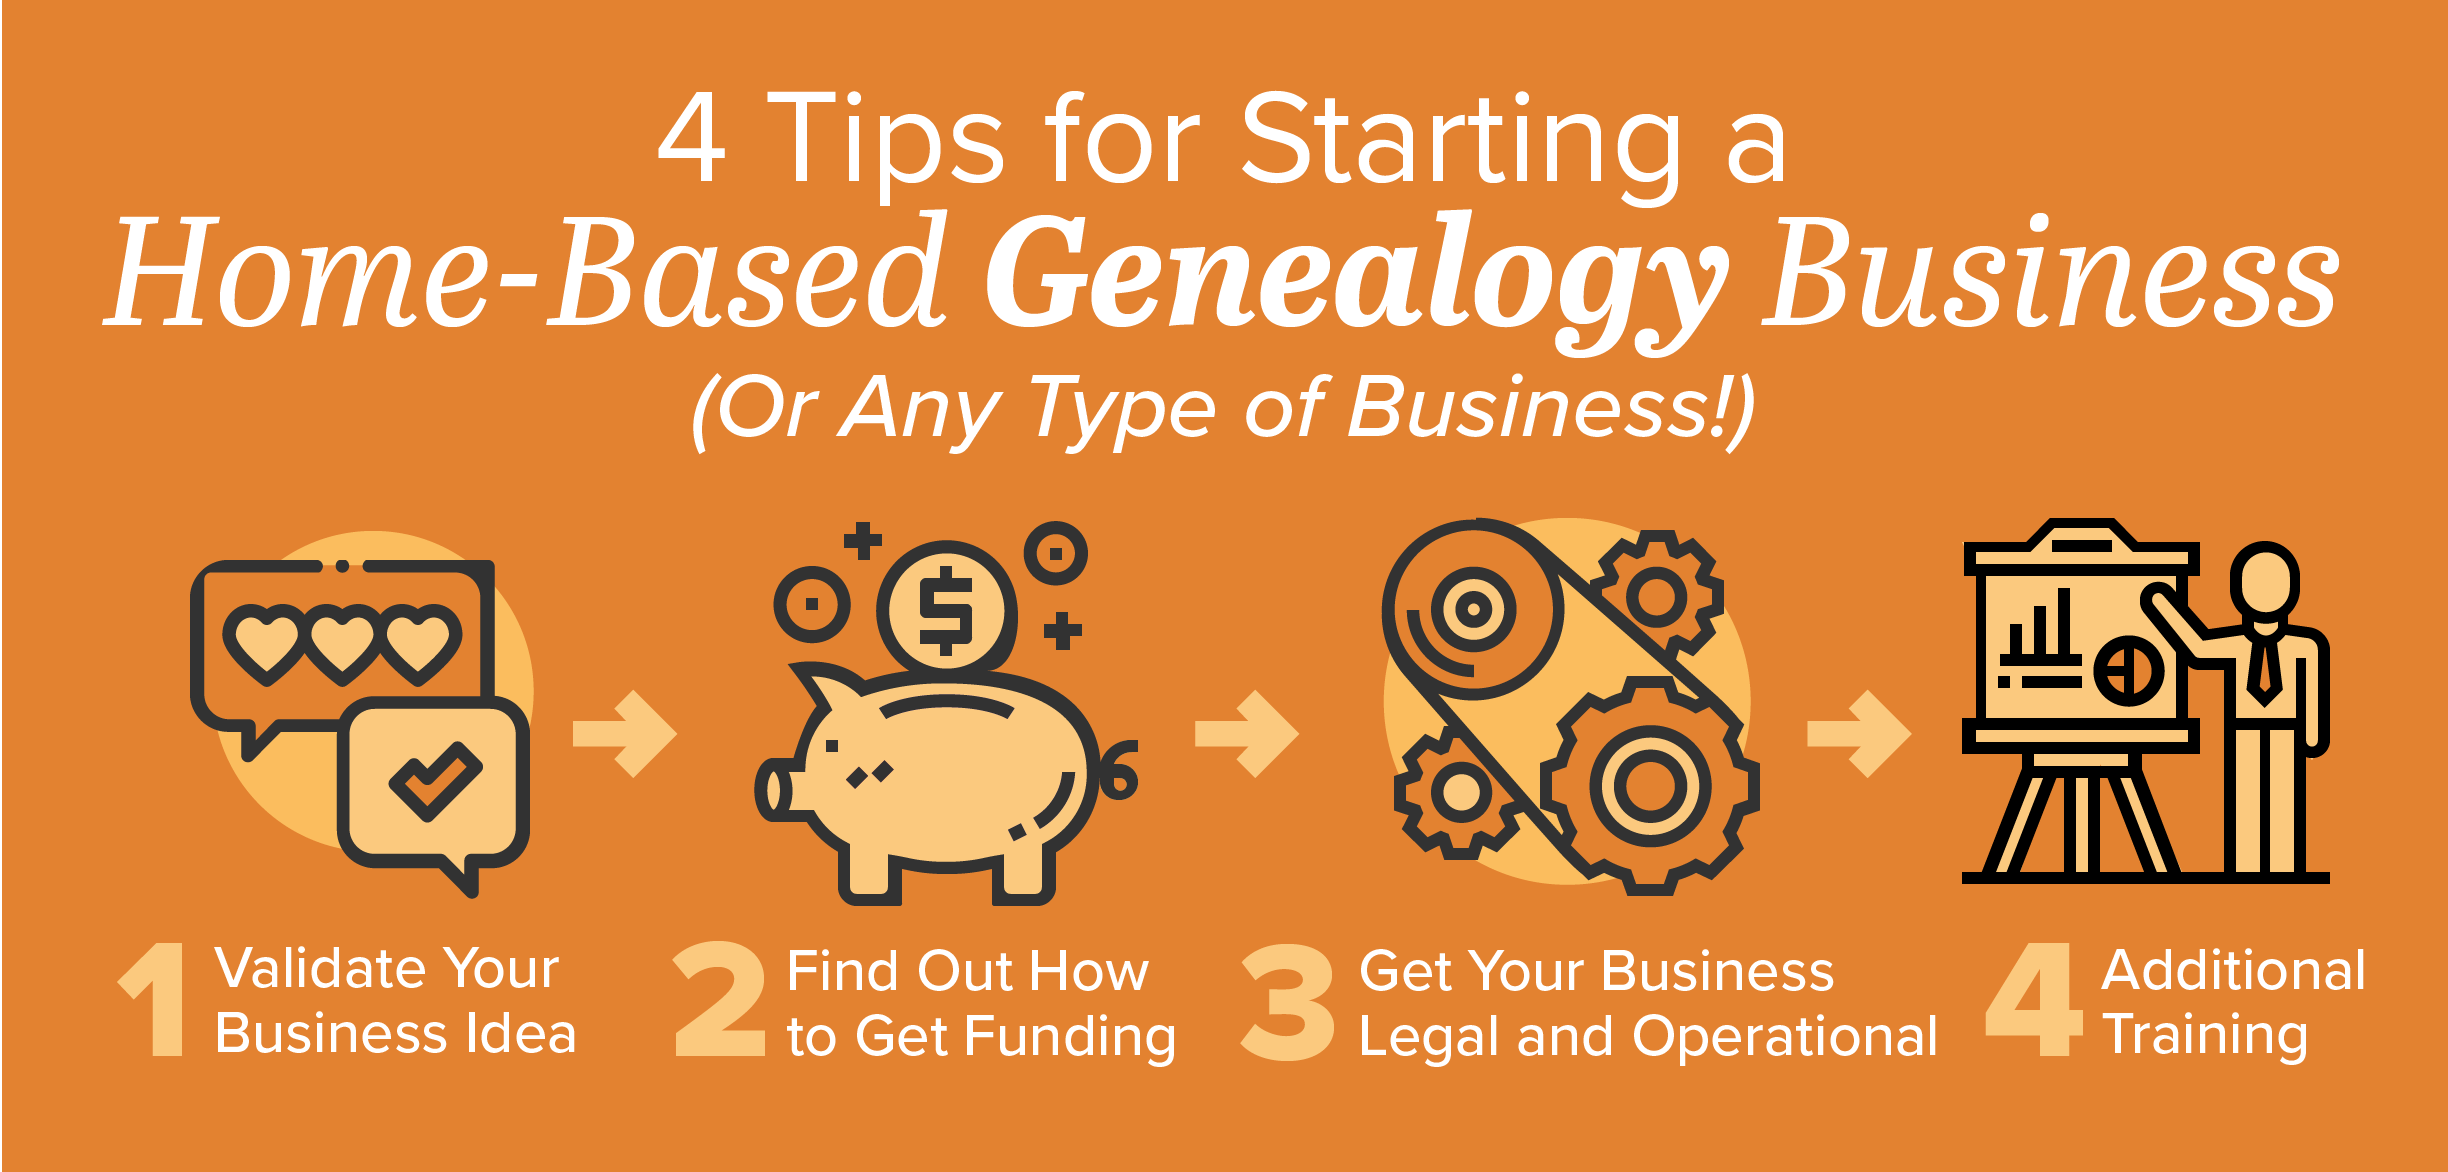 Genealogy business tips infographic